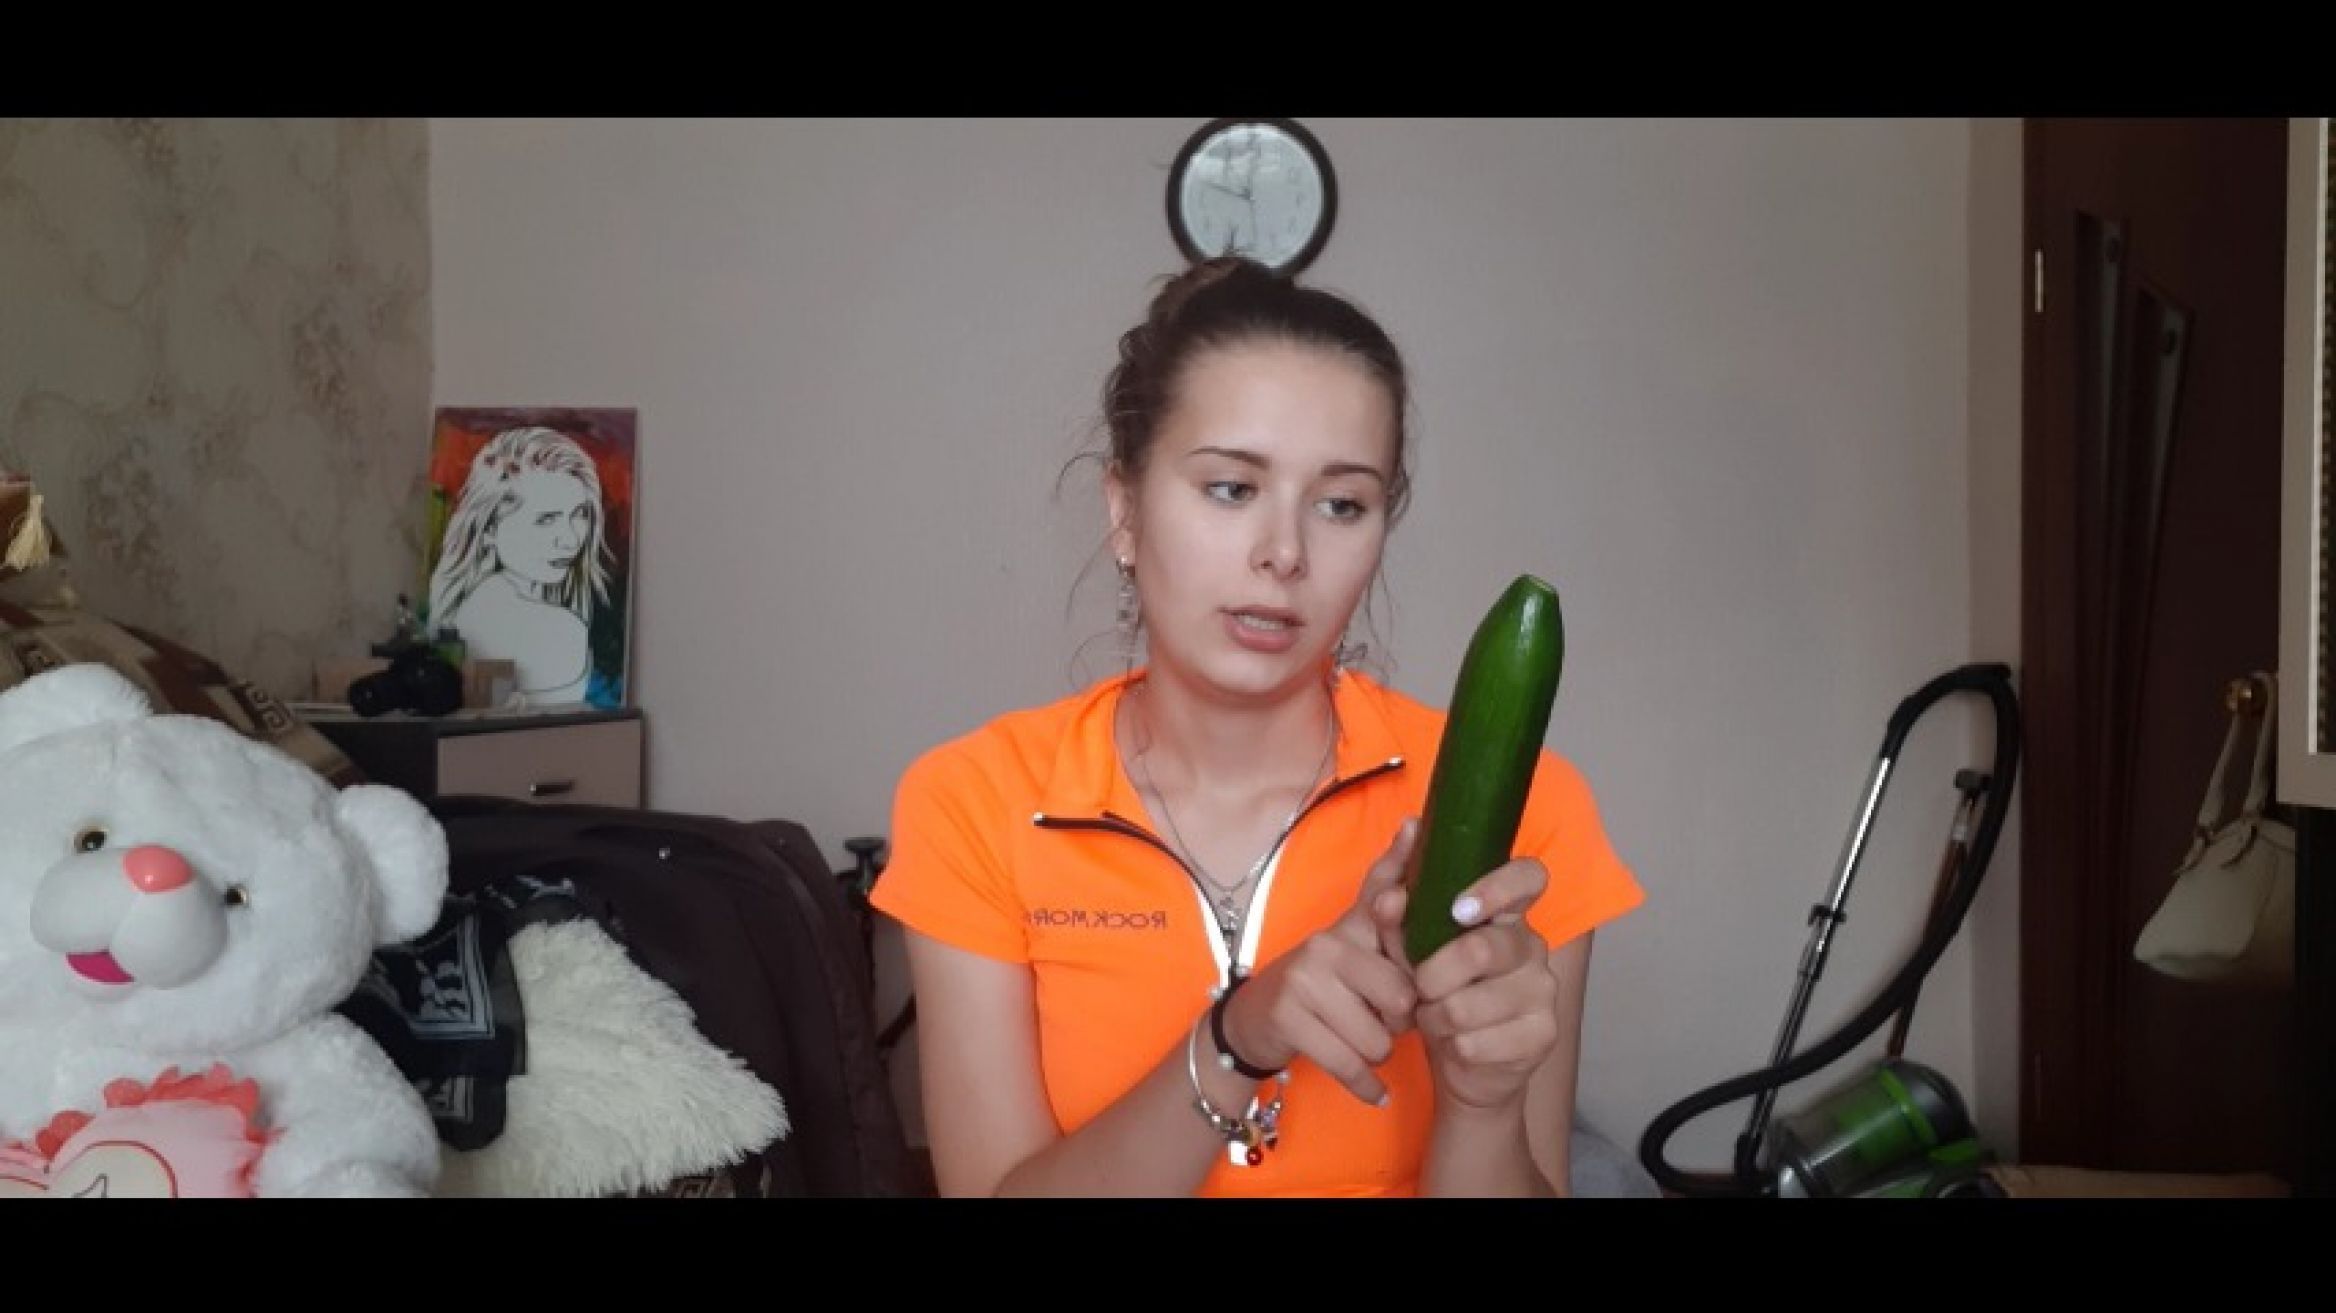 Guess what I am doing with my cucumber